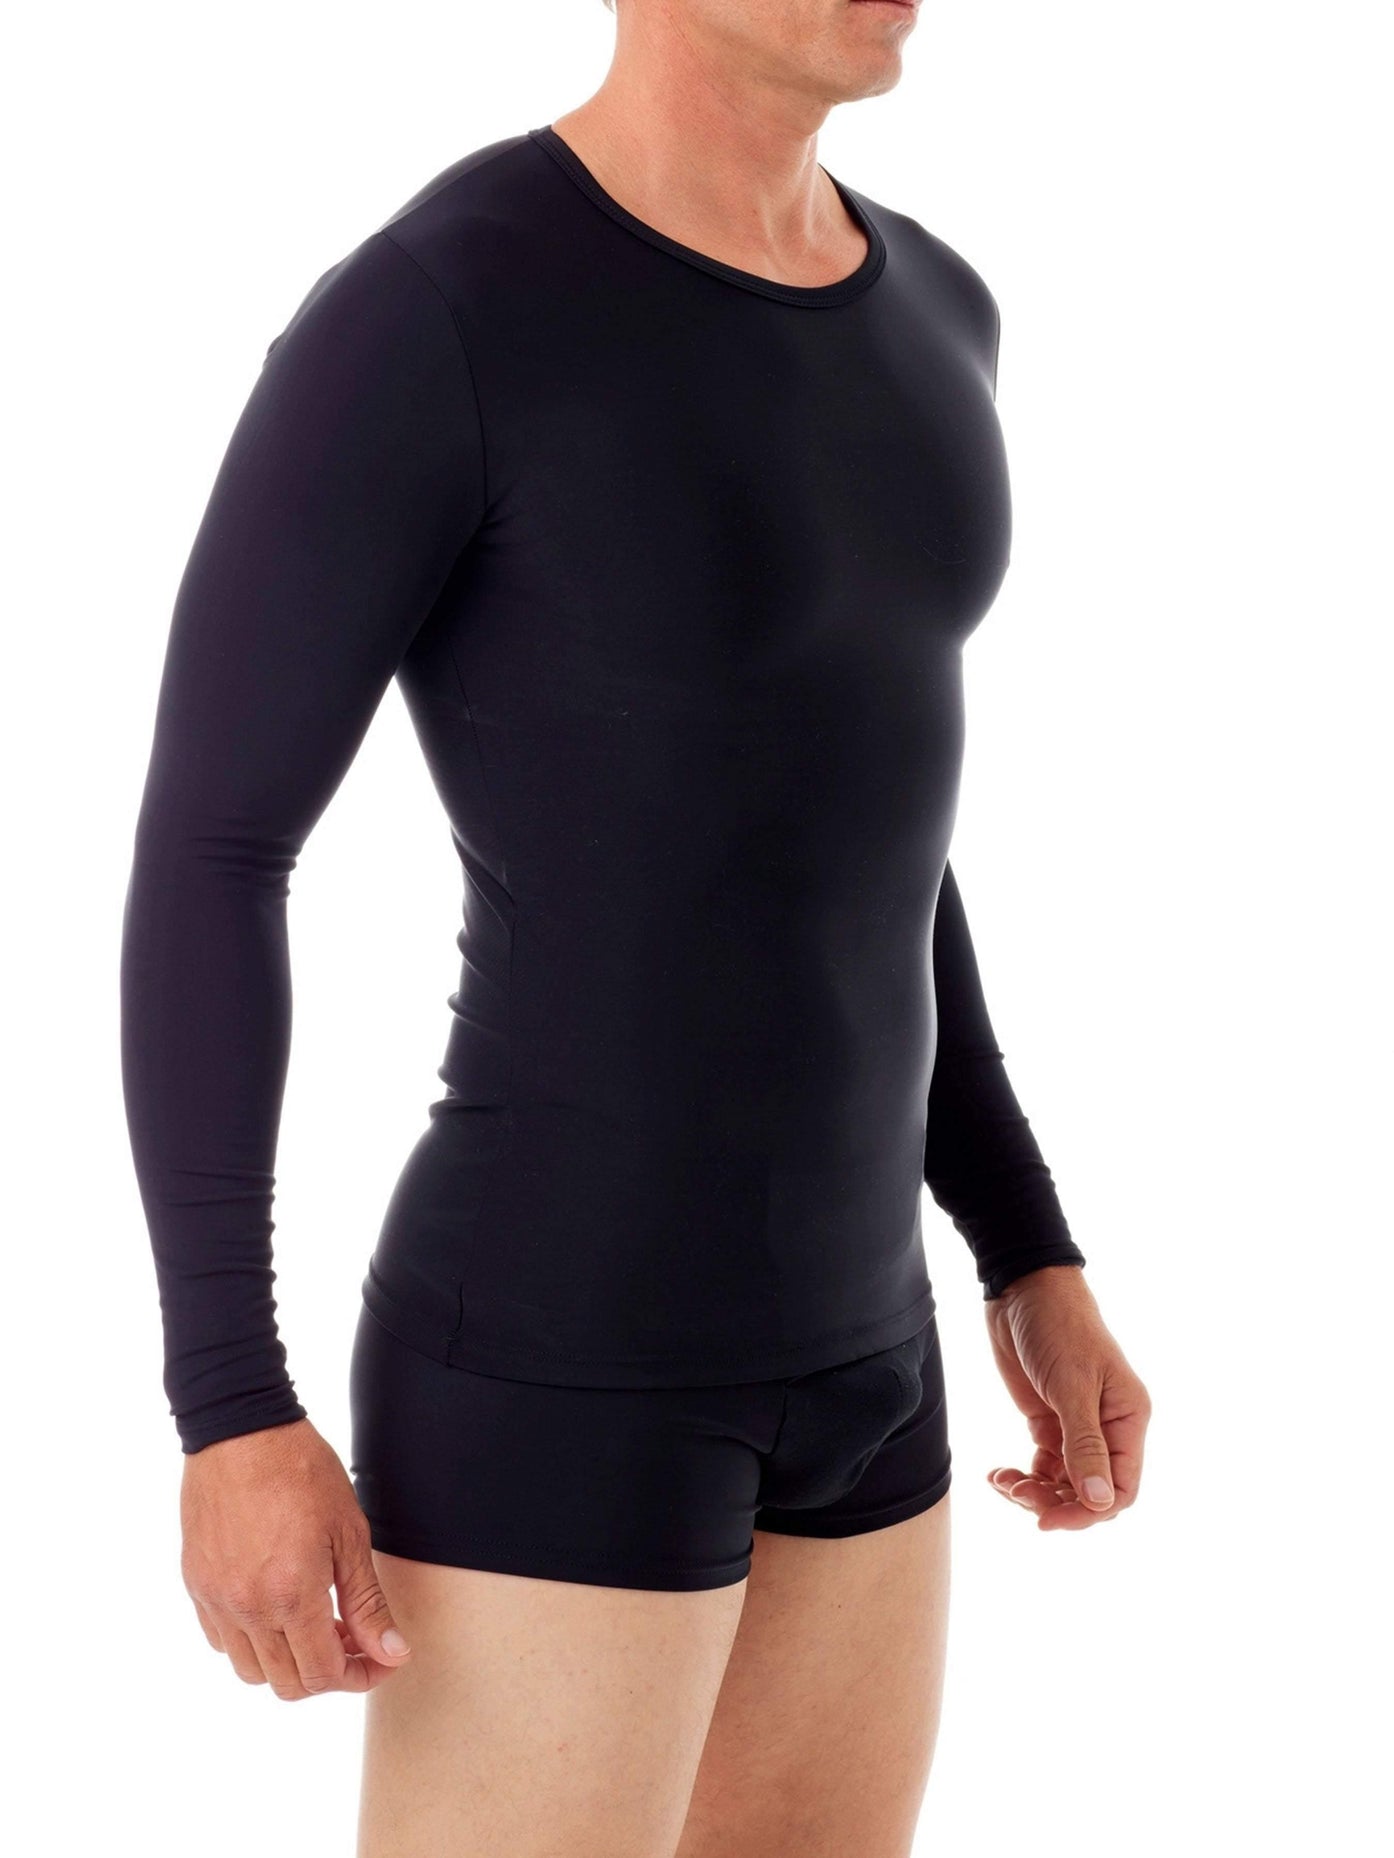 Brand new Long Sleeve Compression Shirts that feel like skin tight silk ...